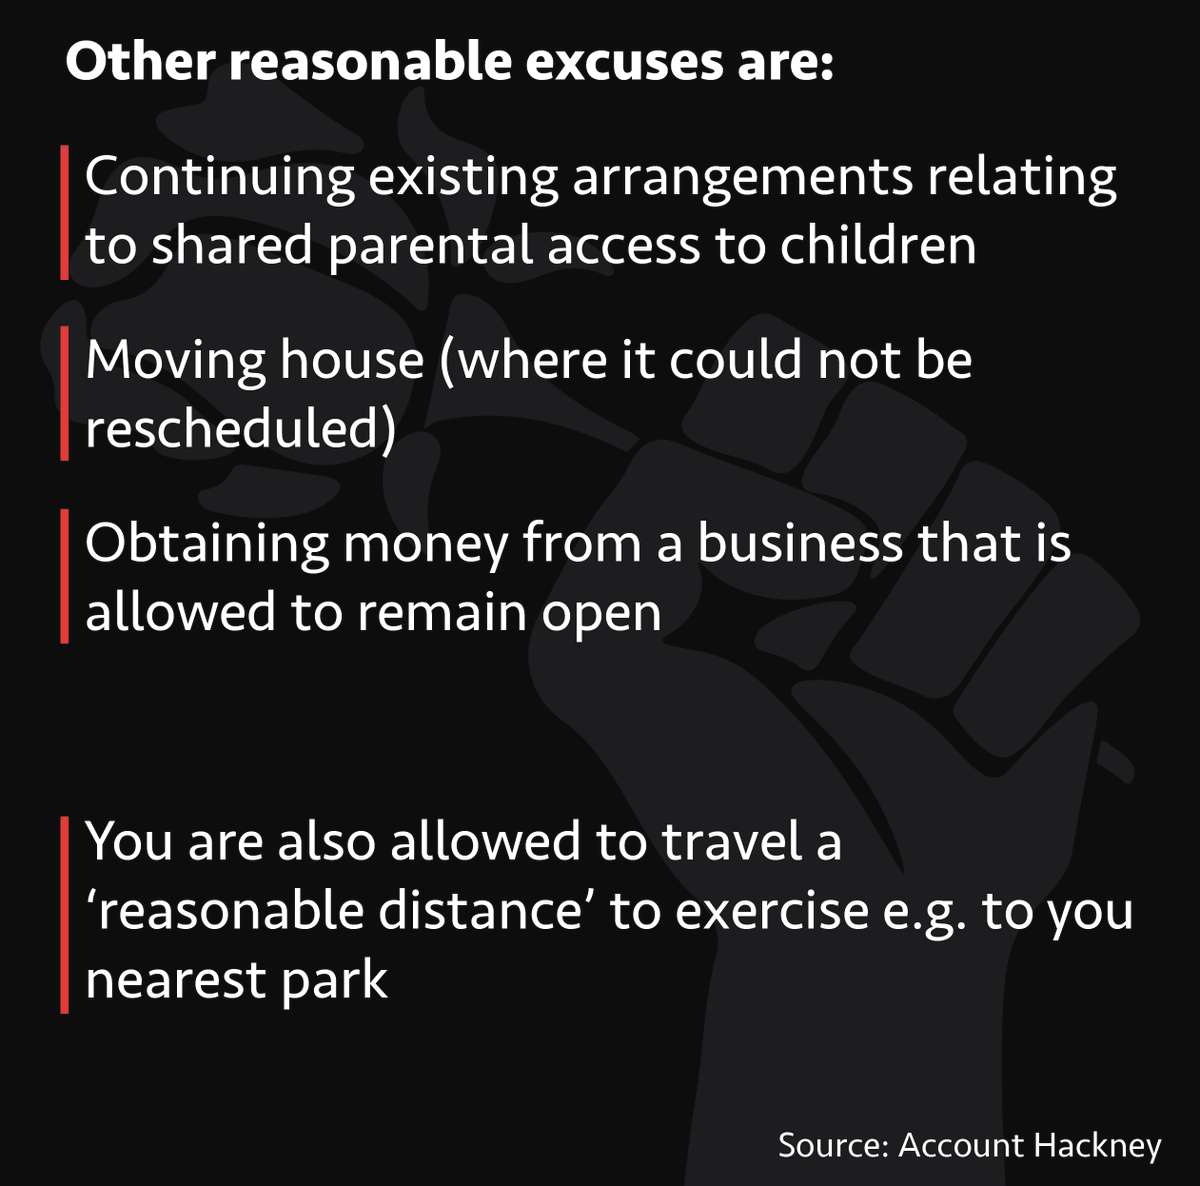 Other reasonable excuses